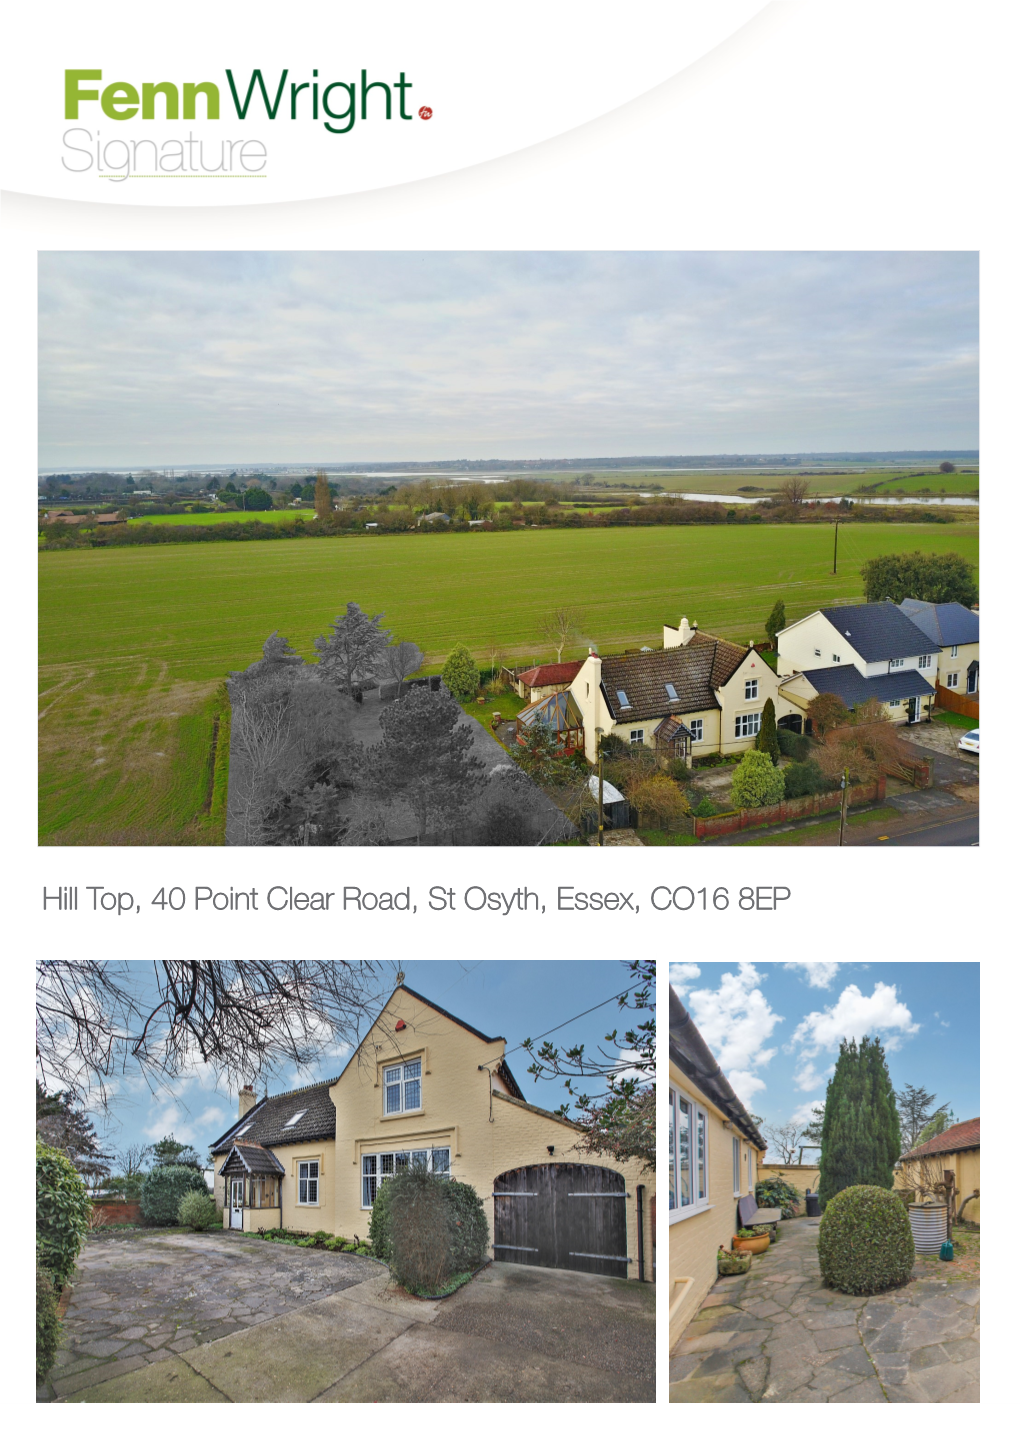 Hill Top, 40 Point Clear Road, St Osyth, Essex, CO16 8EP